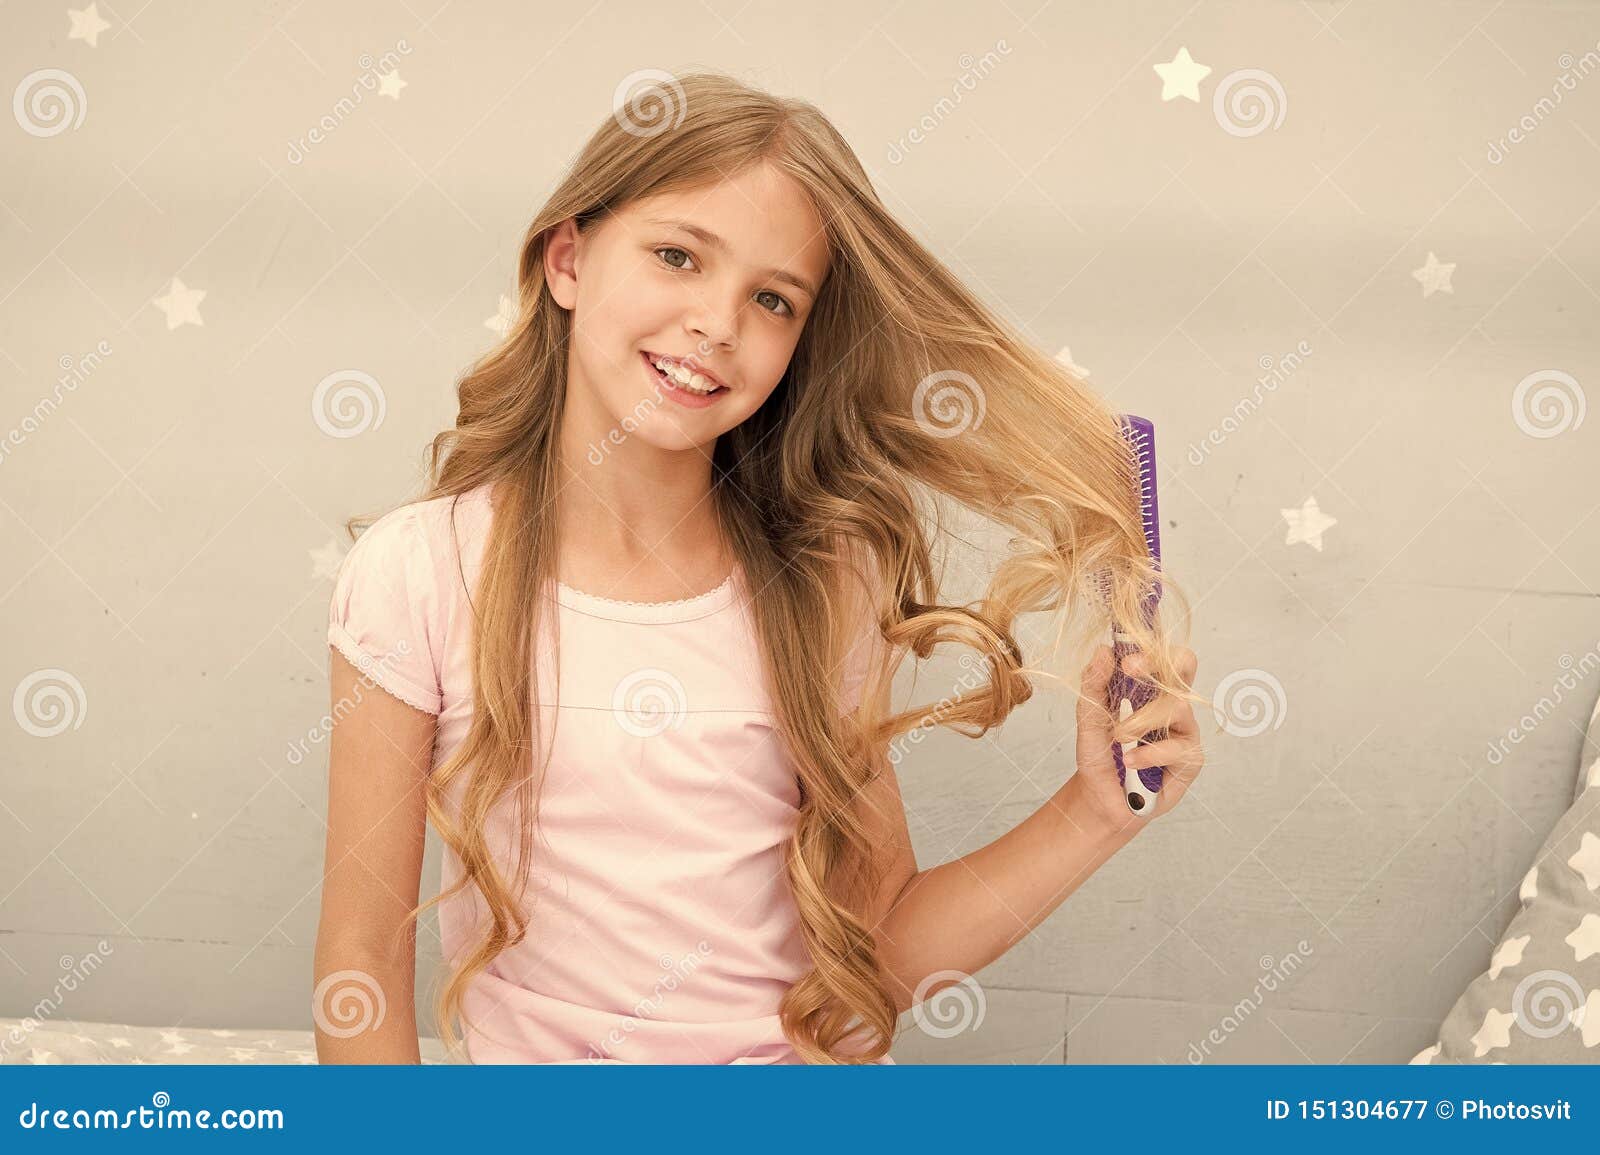 Child Curly Hairstyle Hold Hairbrush or Comb. Comb Hair before Go To Sleep.  Hairdressing Habits Concept Stock Image - Image of curly, natural: 151304677